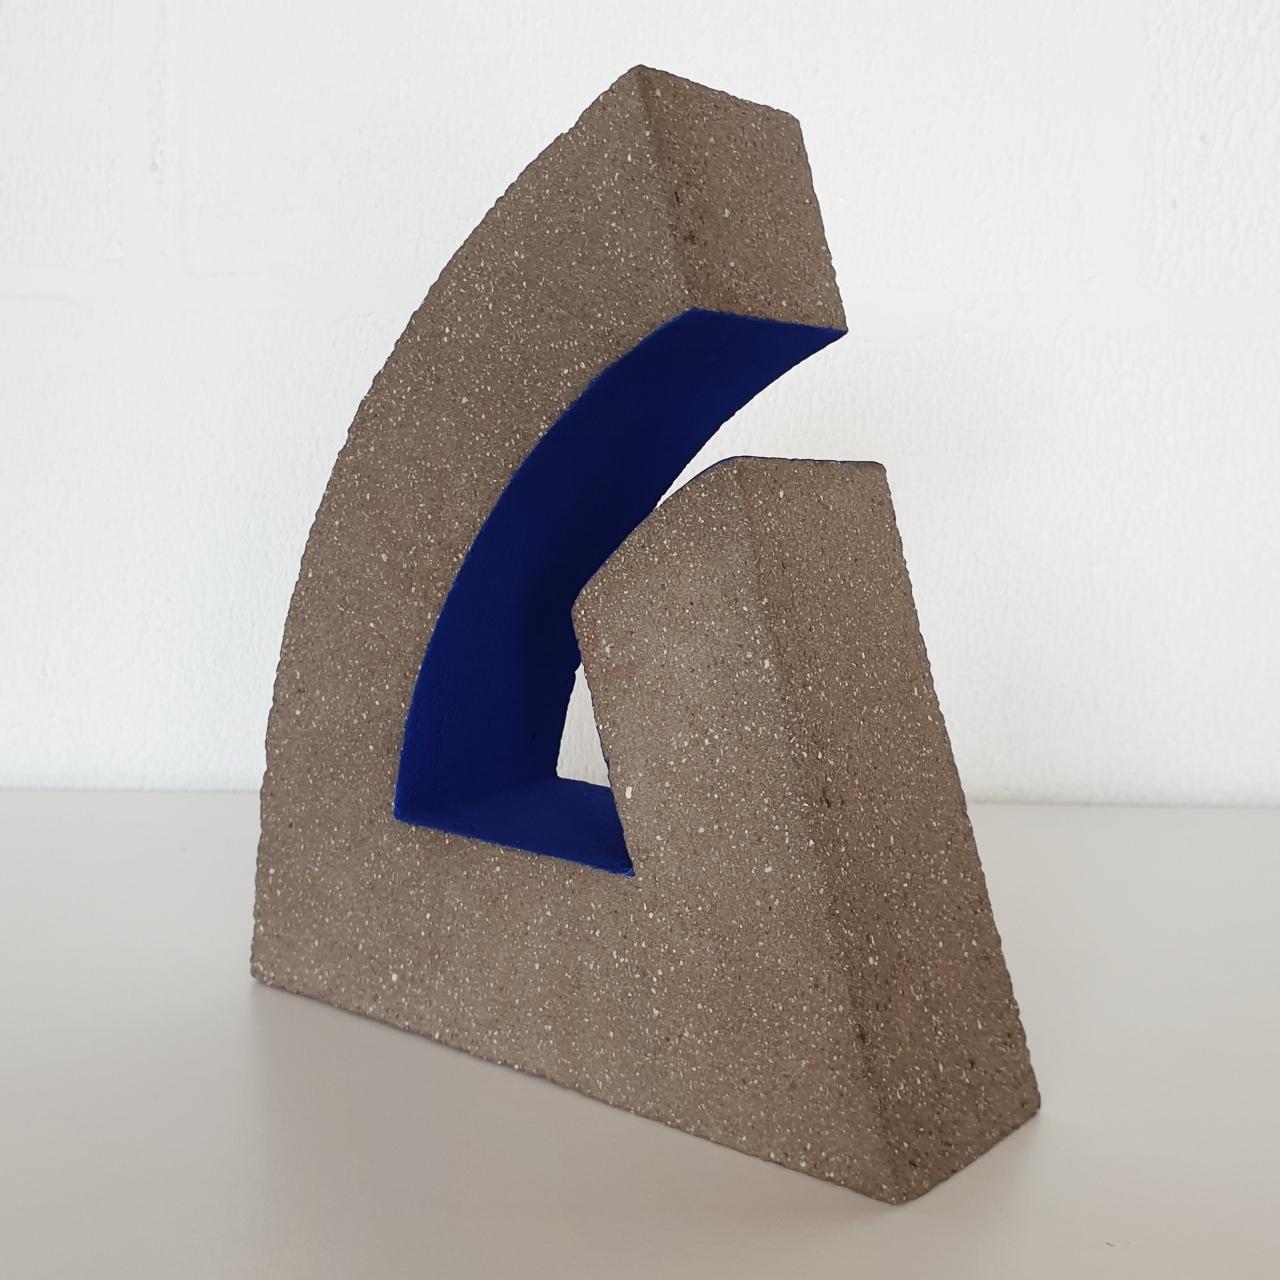 Let de Kok Abstract Sculpture - Untitled - contemporary modern abstract geometric ceramic sculpture object